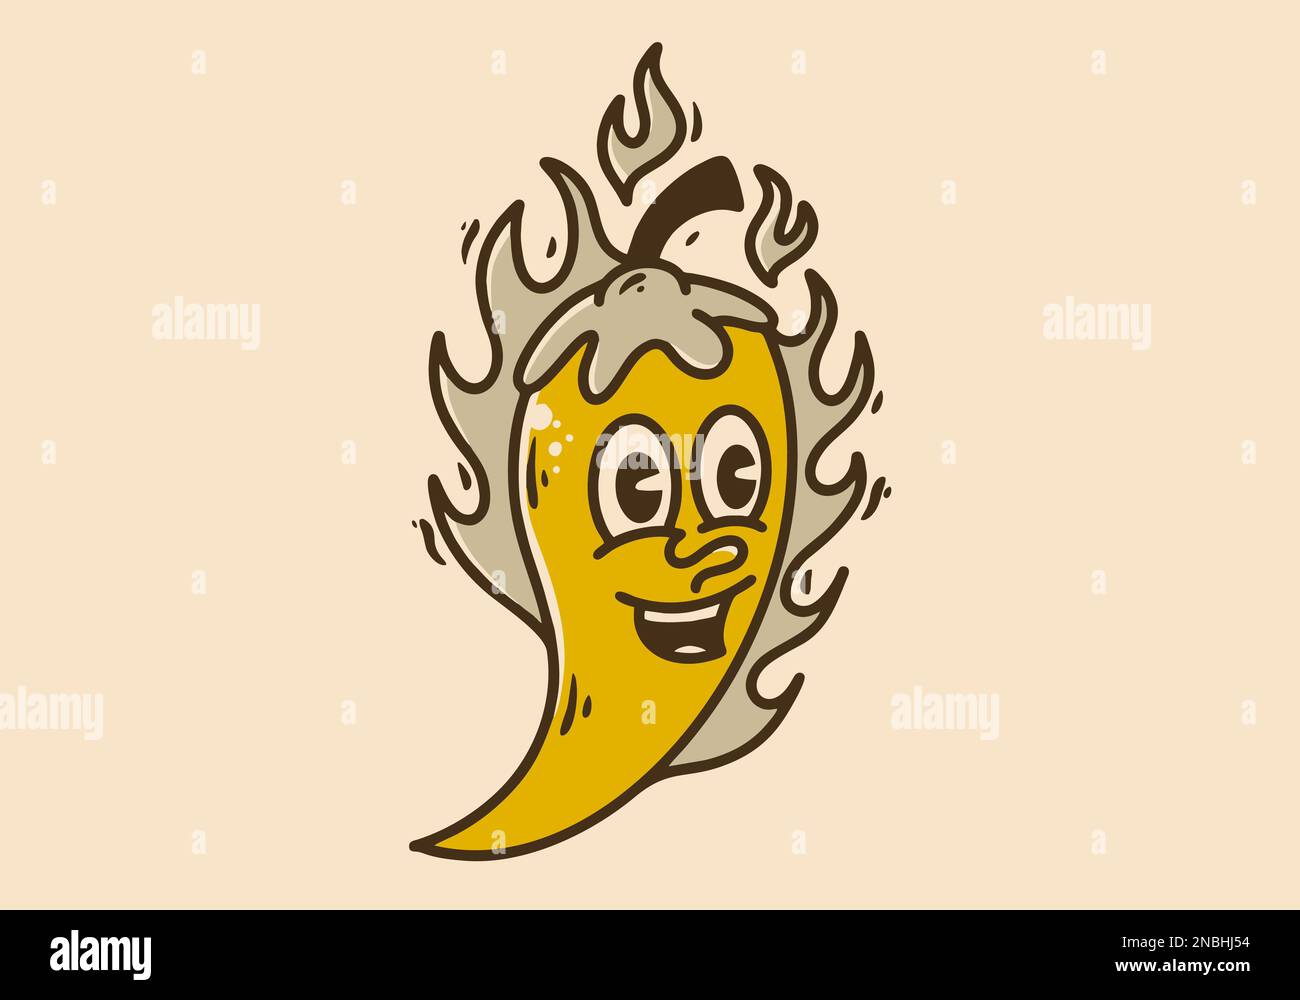 Illustration character design of a yellow chili with fire flame Stock Vector